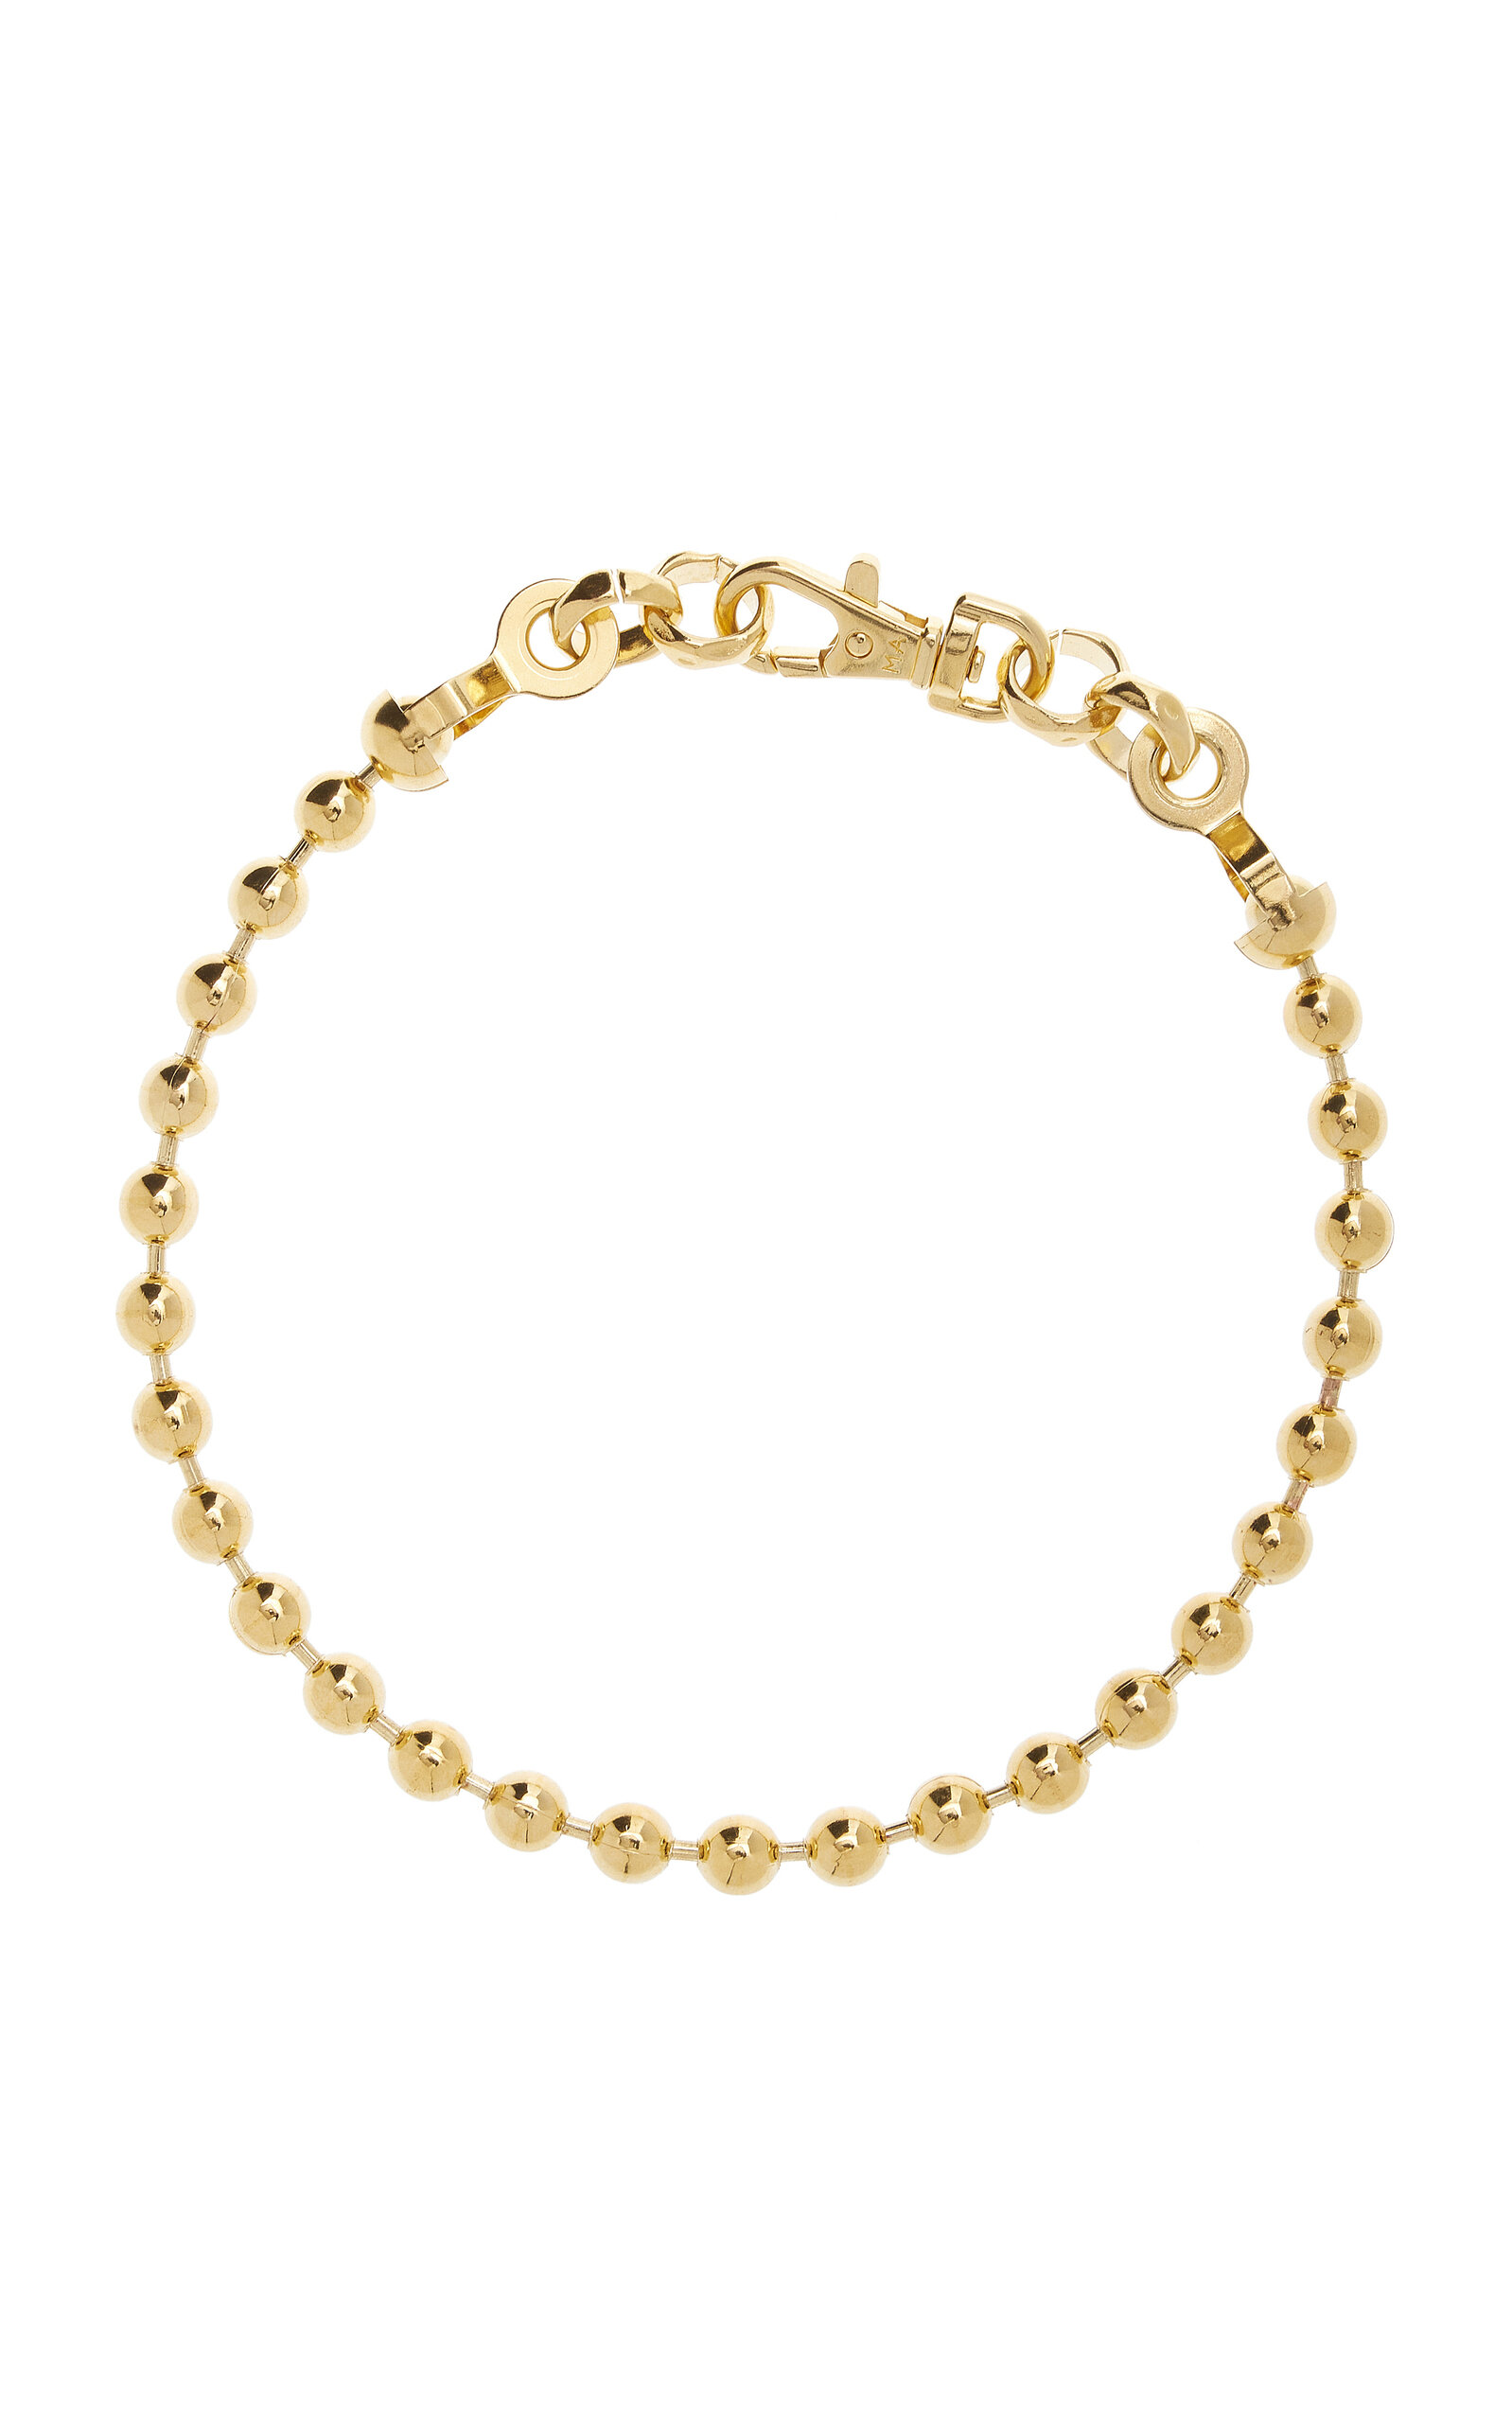 Martine Ali Women's Exclusive Ball 14k Gold Dipped Necklace